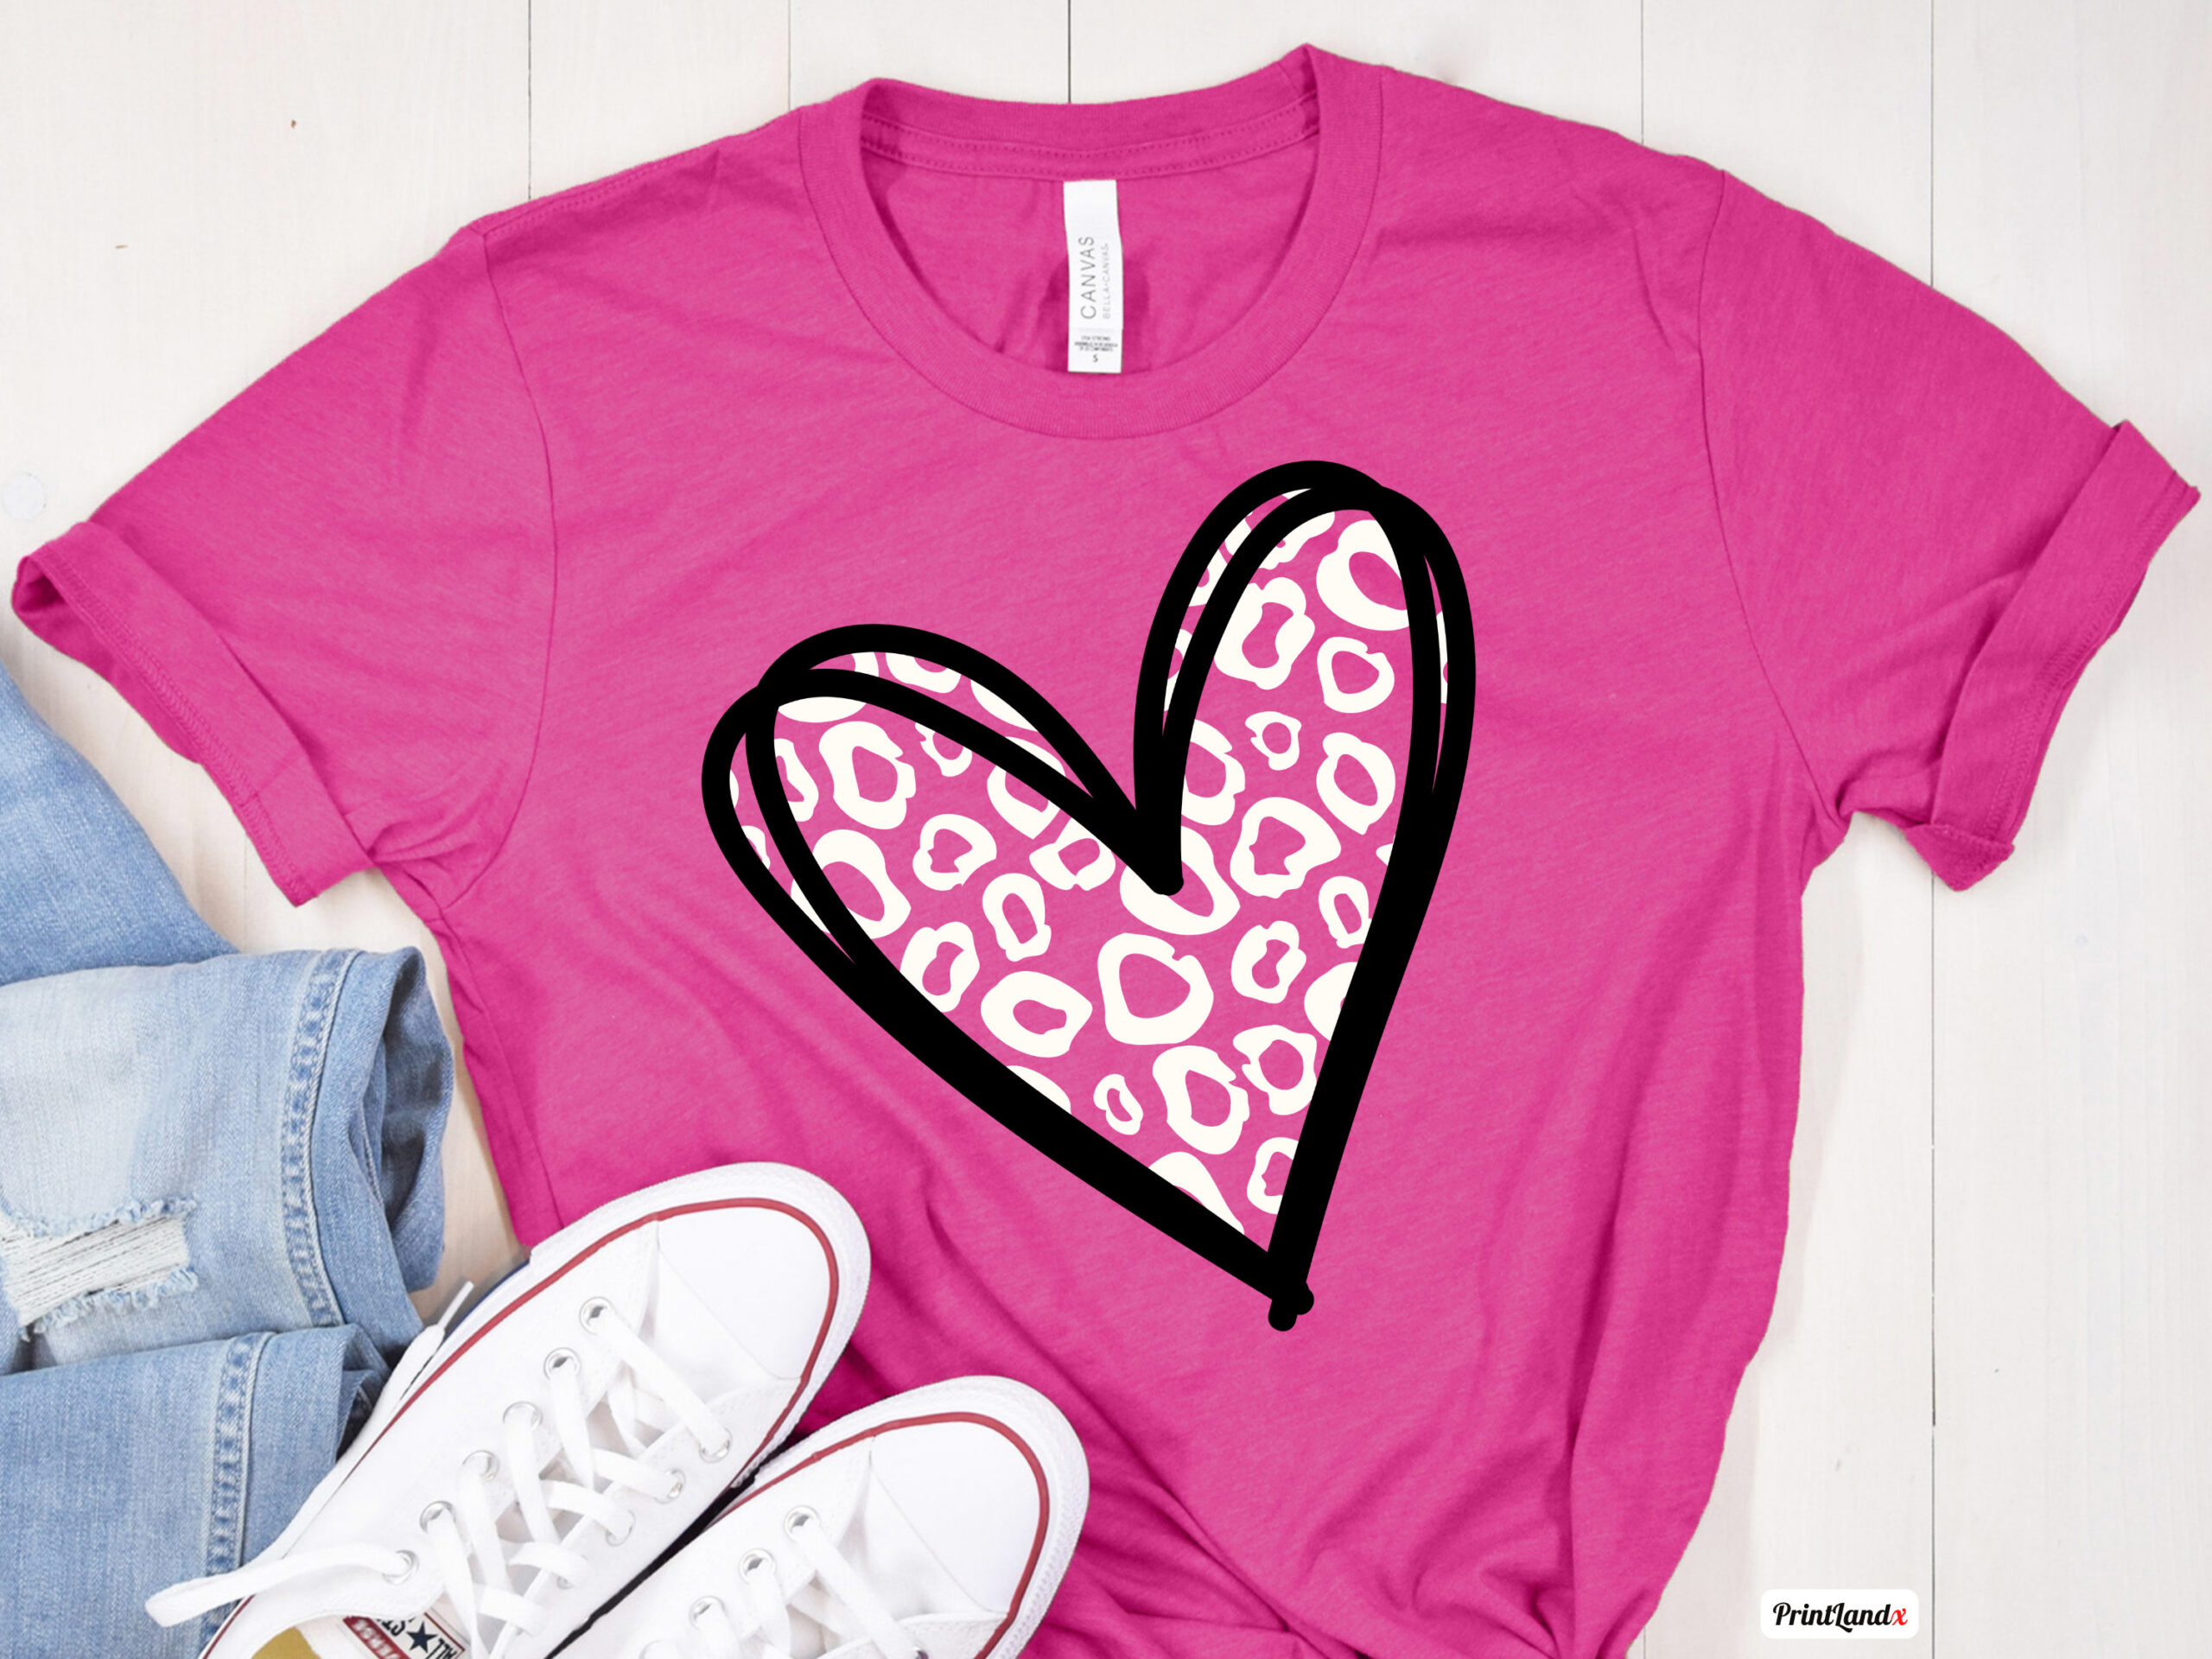 Girls Valentine's Outfit  Leopard Print Top And Heart Patch